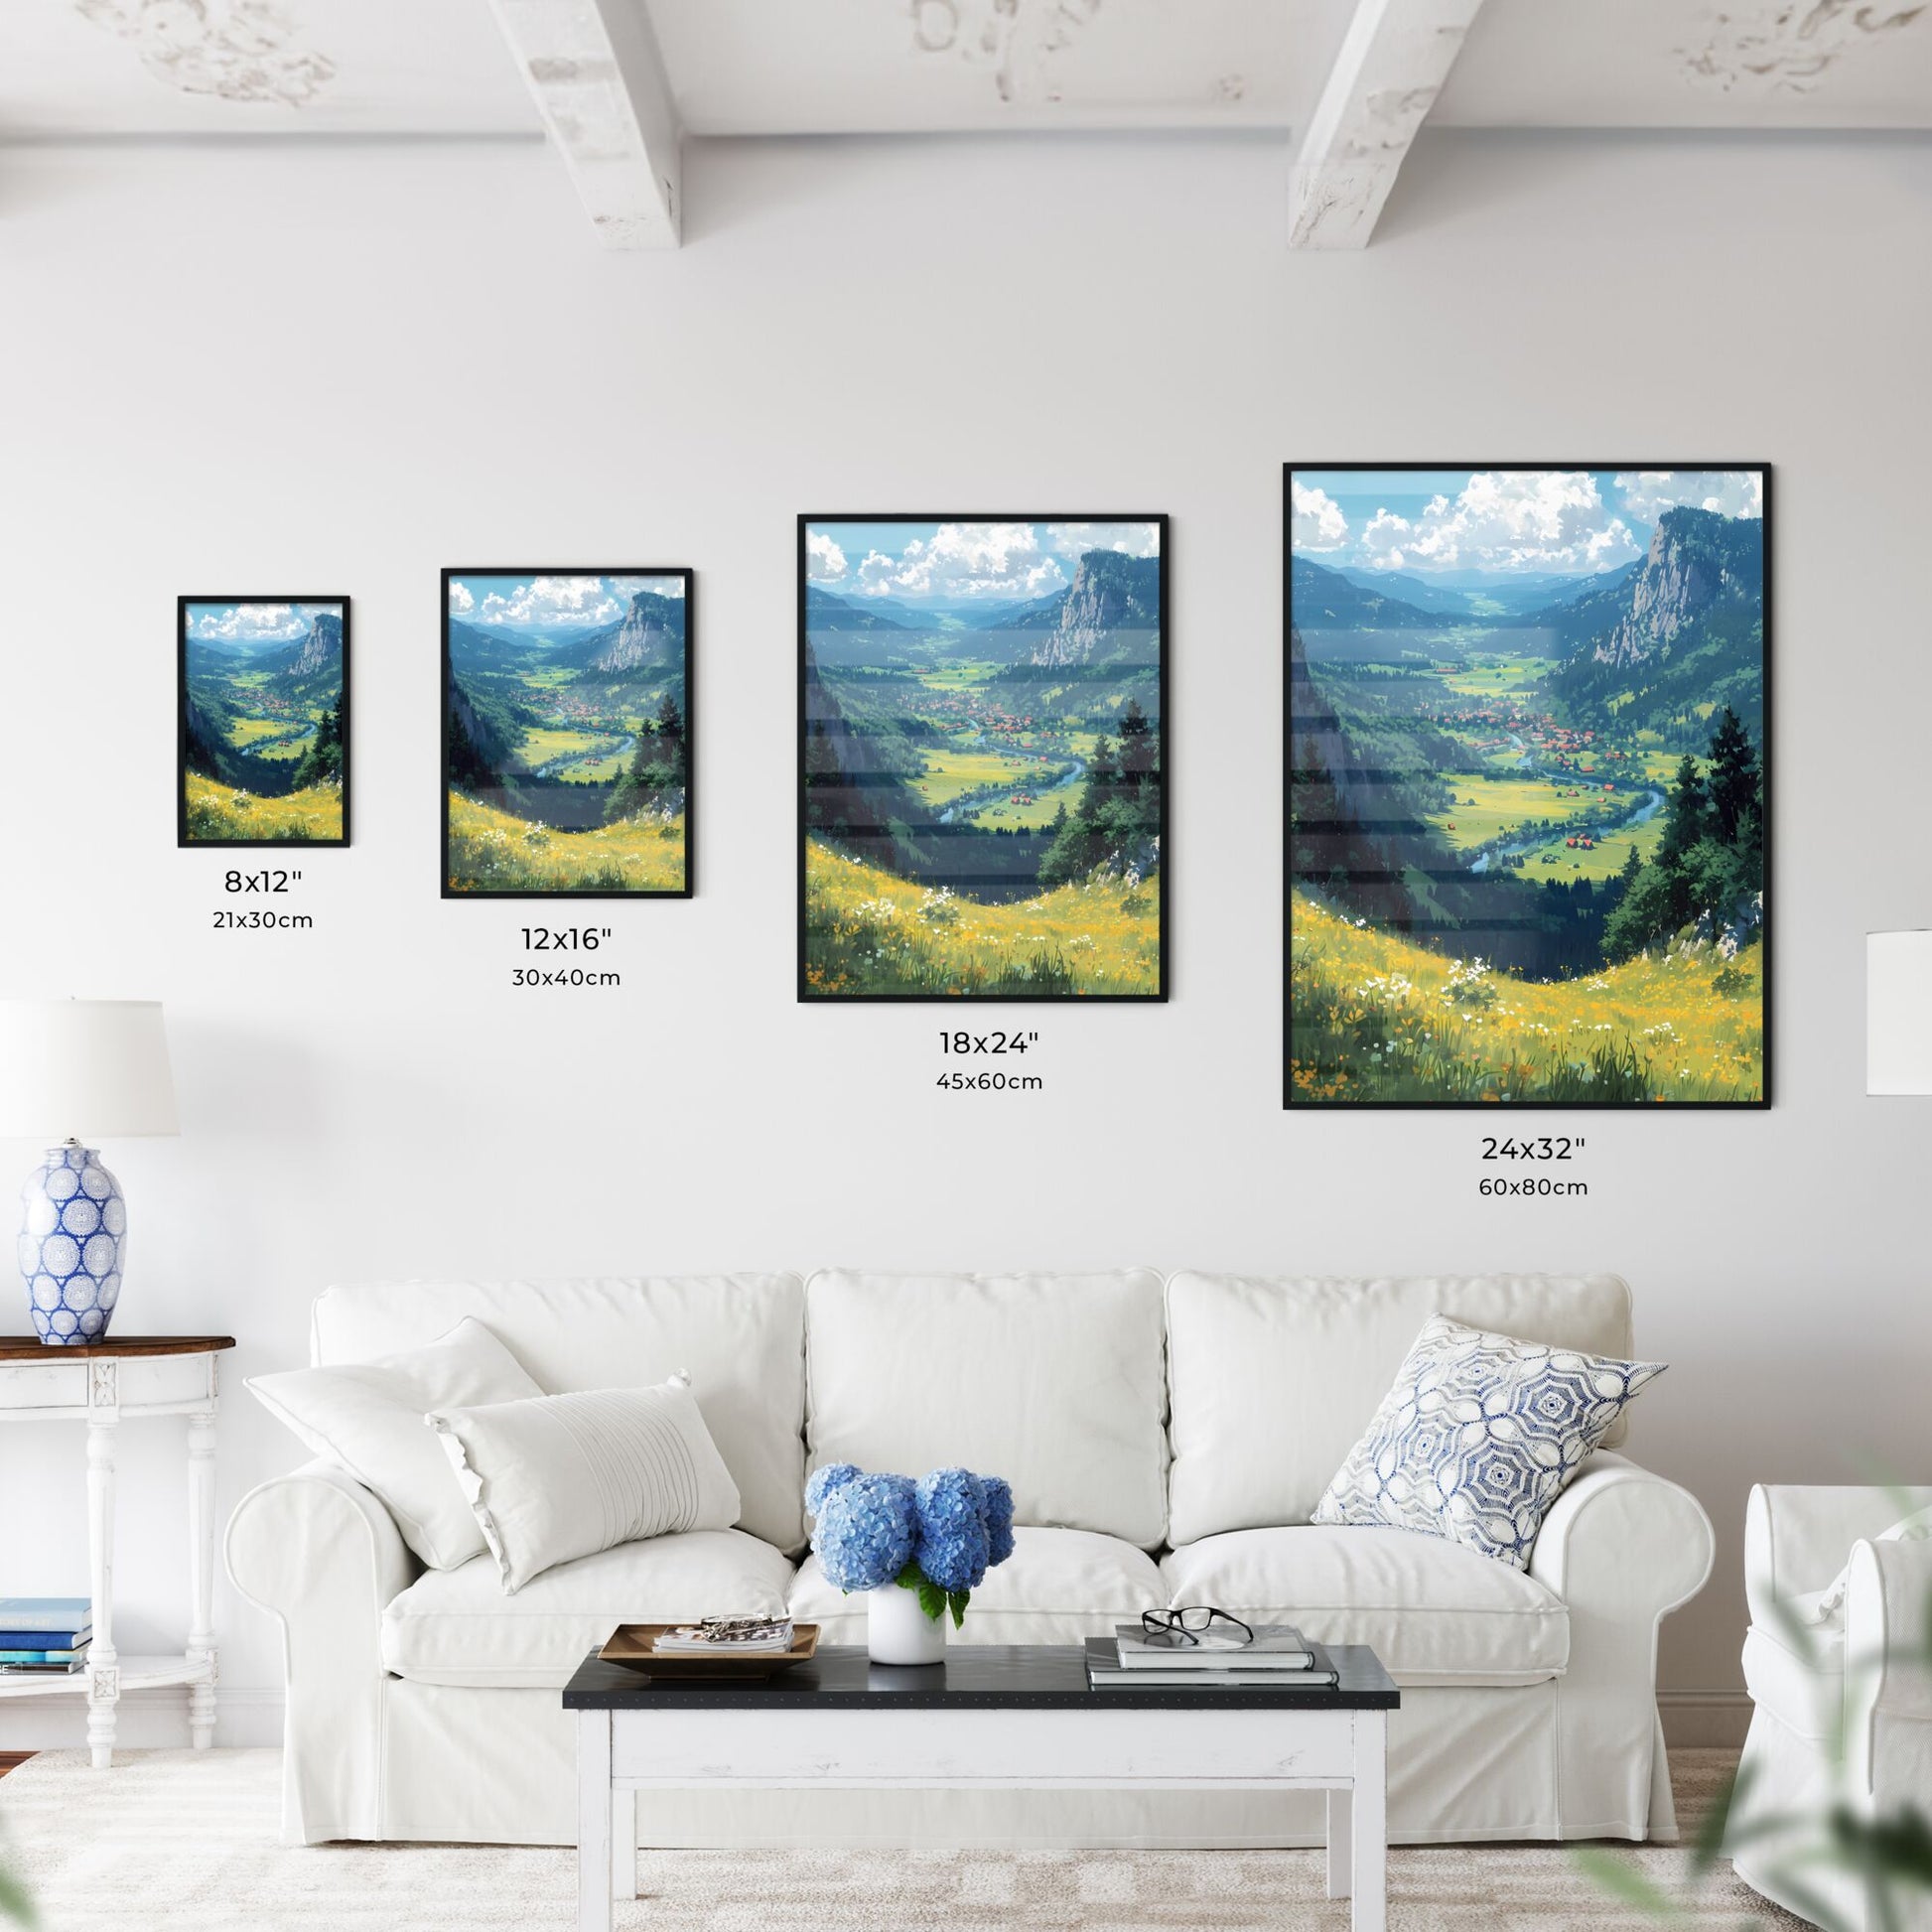 A landscape of the German countryside - Art print of a valley with a river and mountains Default Title